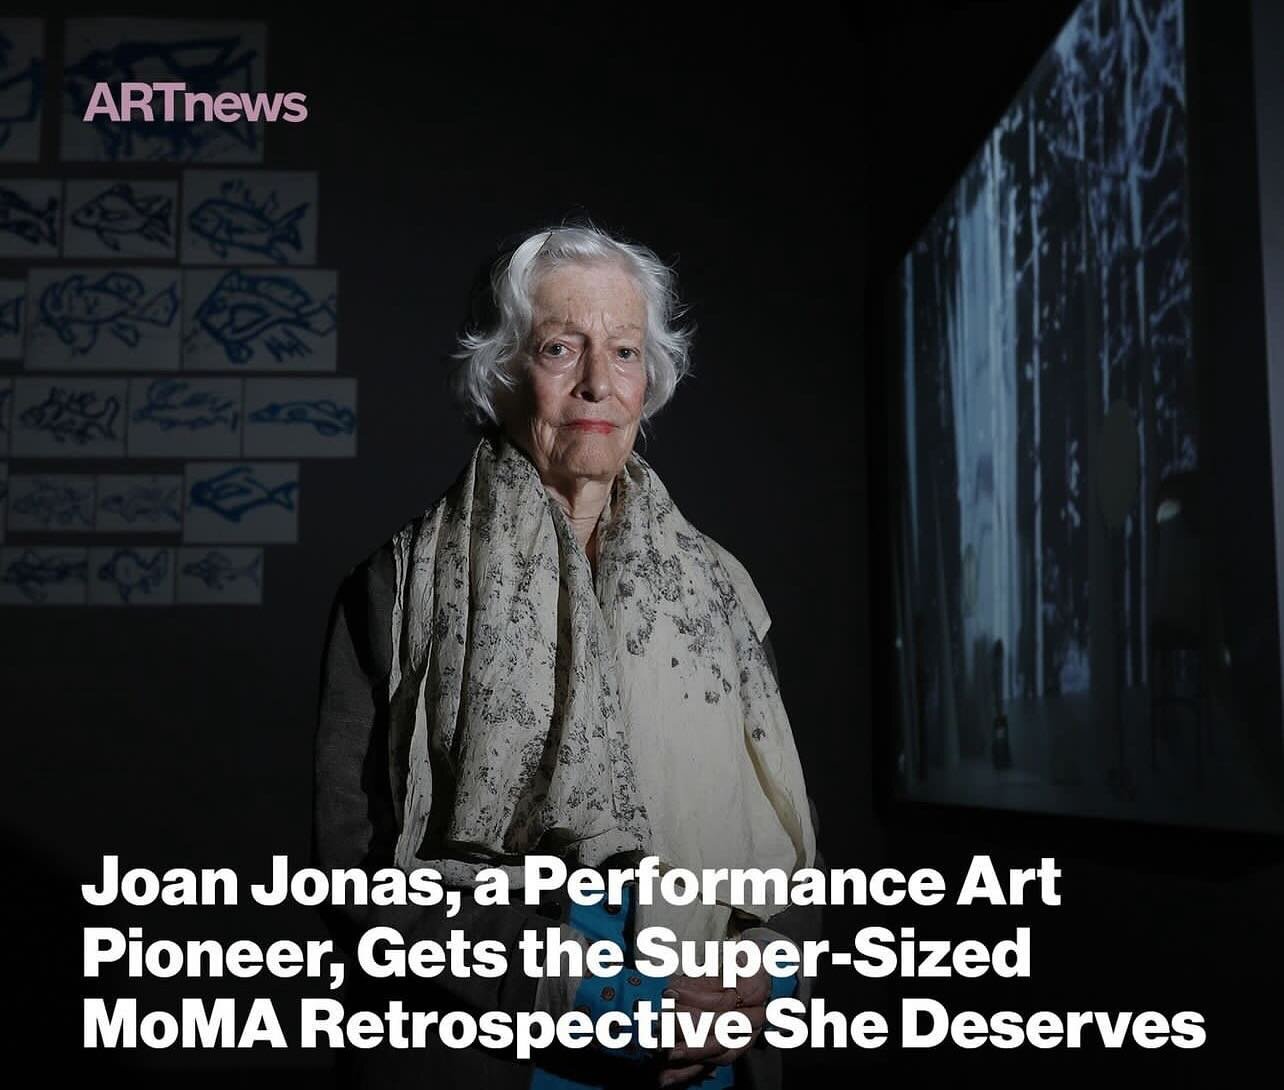 WHY did this take so long? It&rsquo;s amazing Joan Jonas is still alive to experience the recognition she deserved 30+ years ago. 

Joan Jonas (born July 13, 1936) is an American visual artist and a pioneer of video and performance art, and one of th